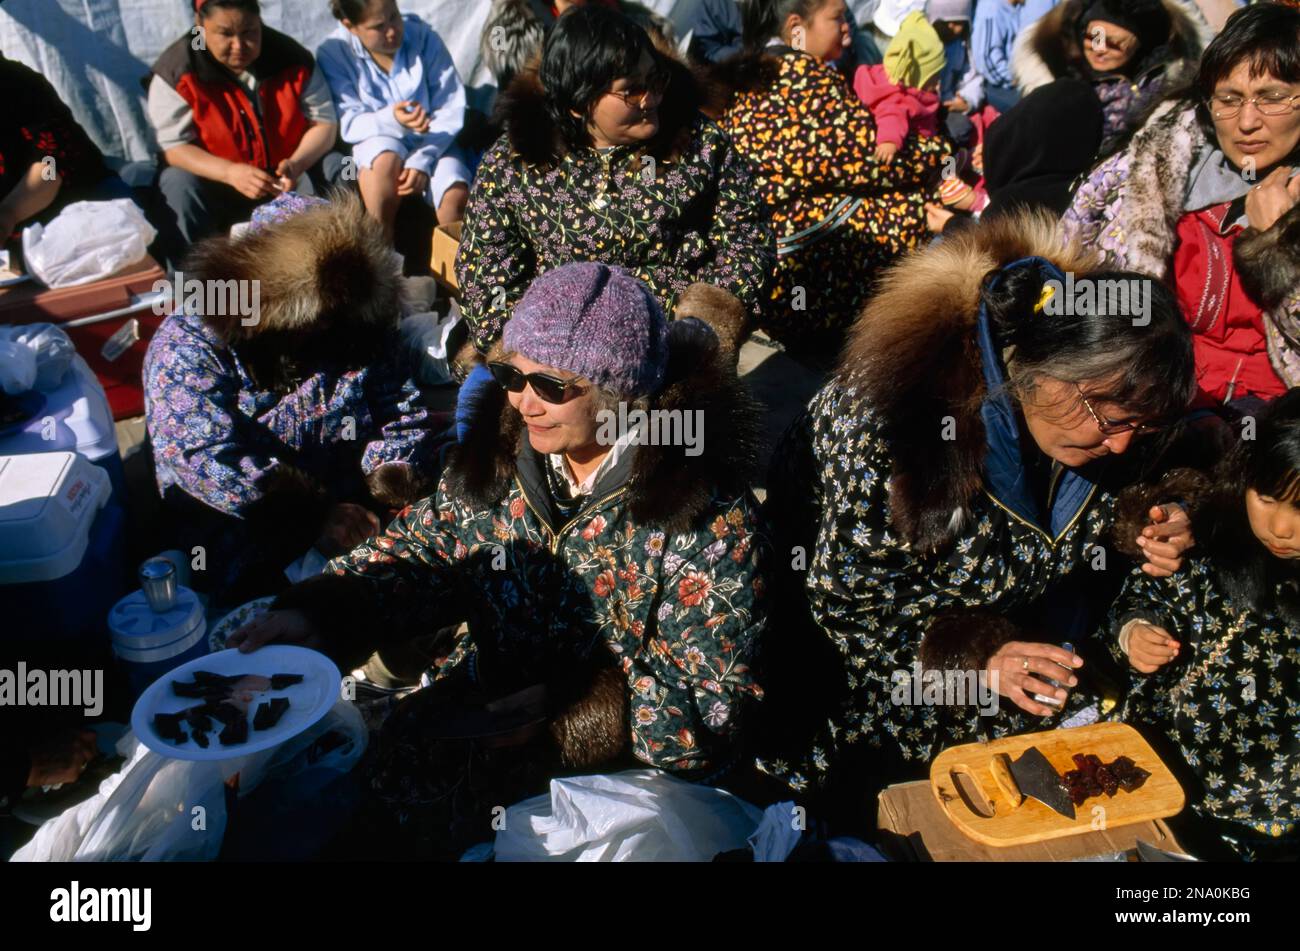 Inuit woman at a gathering; North Slope, Alaska, United States of America Stock Photo